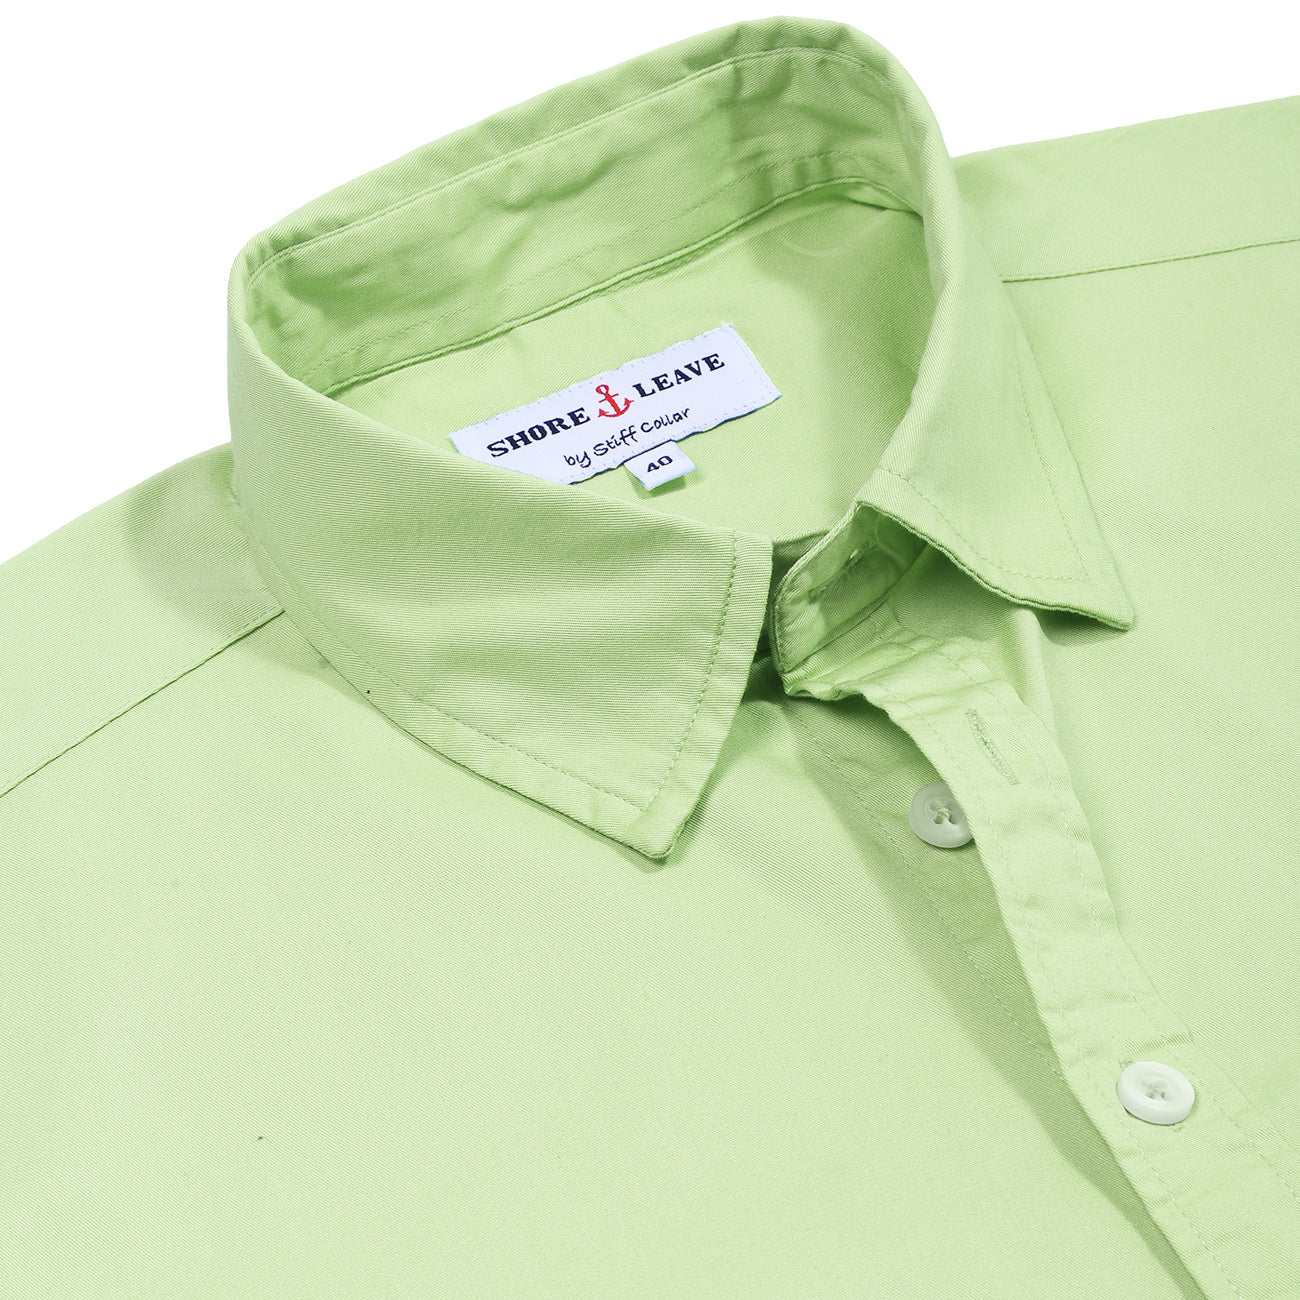 Mint Green Twill Enzyme Washed Double Flap Pocket Texas Shirt